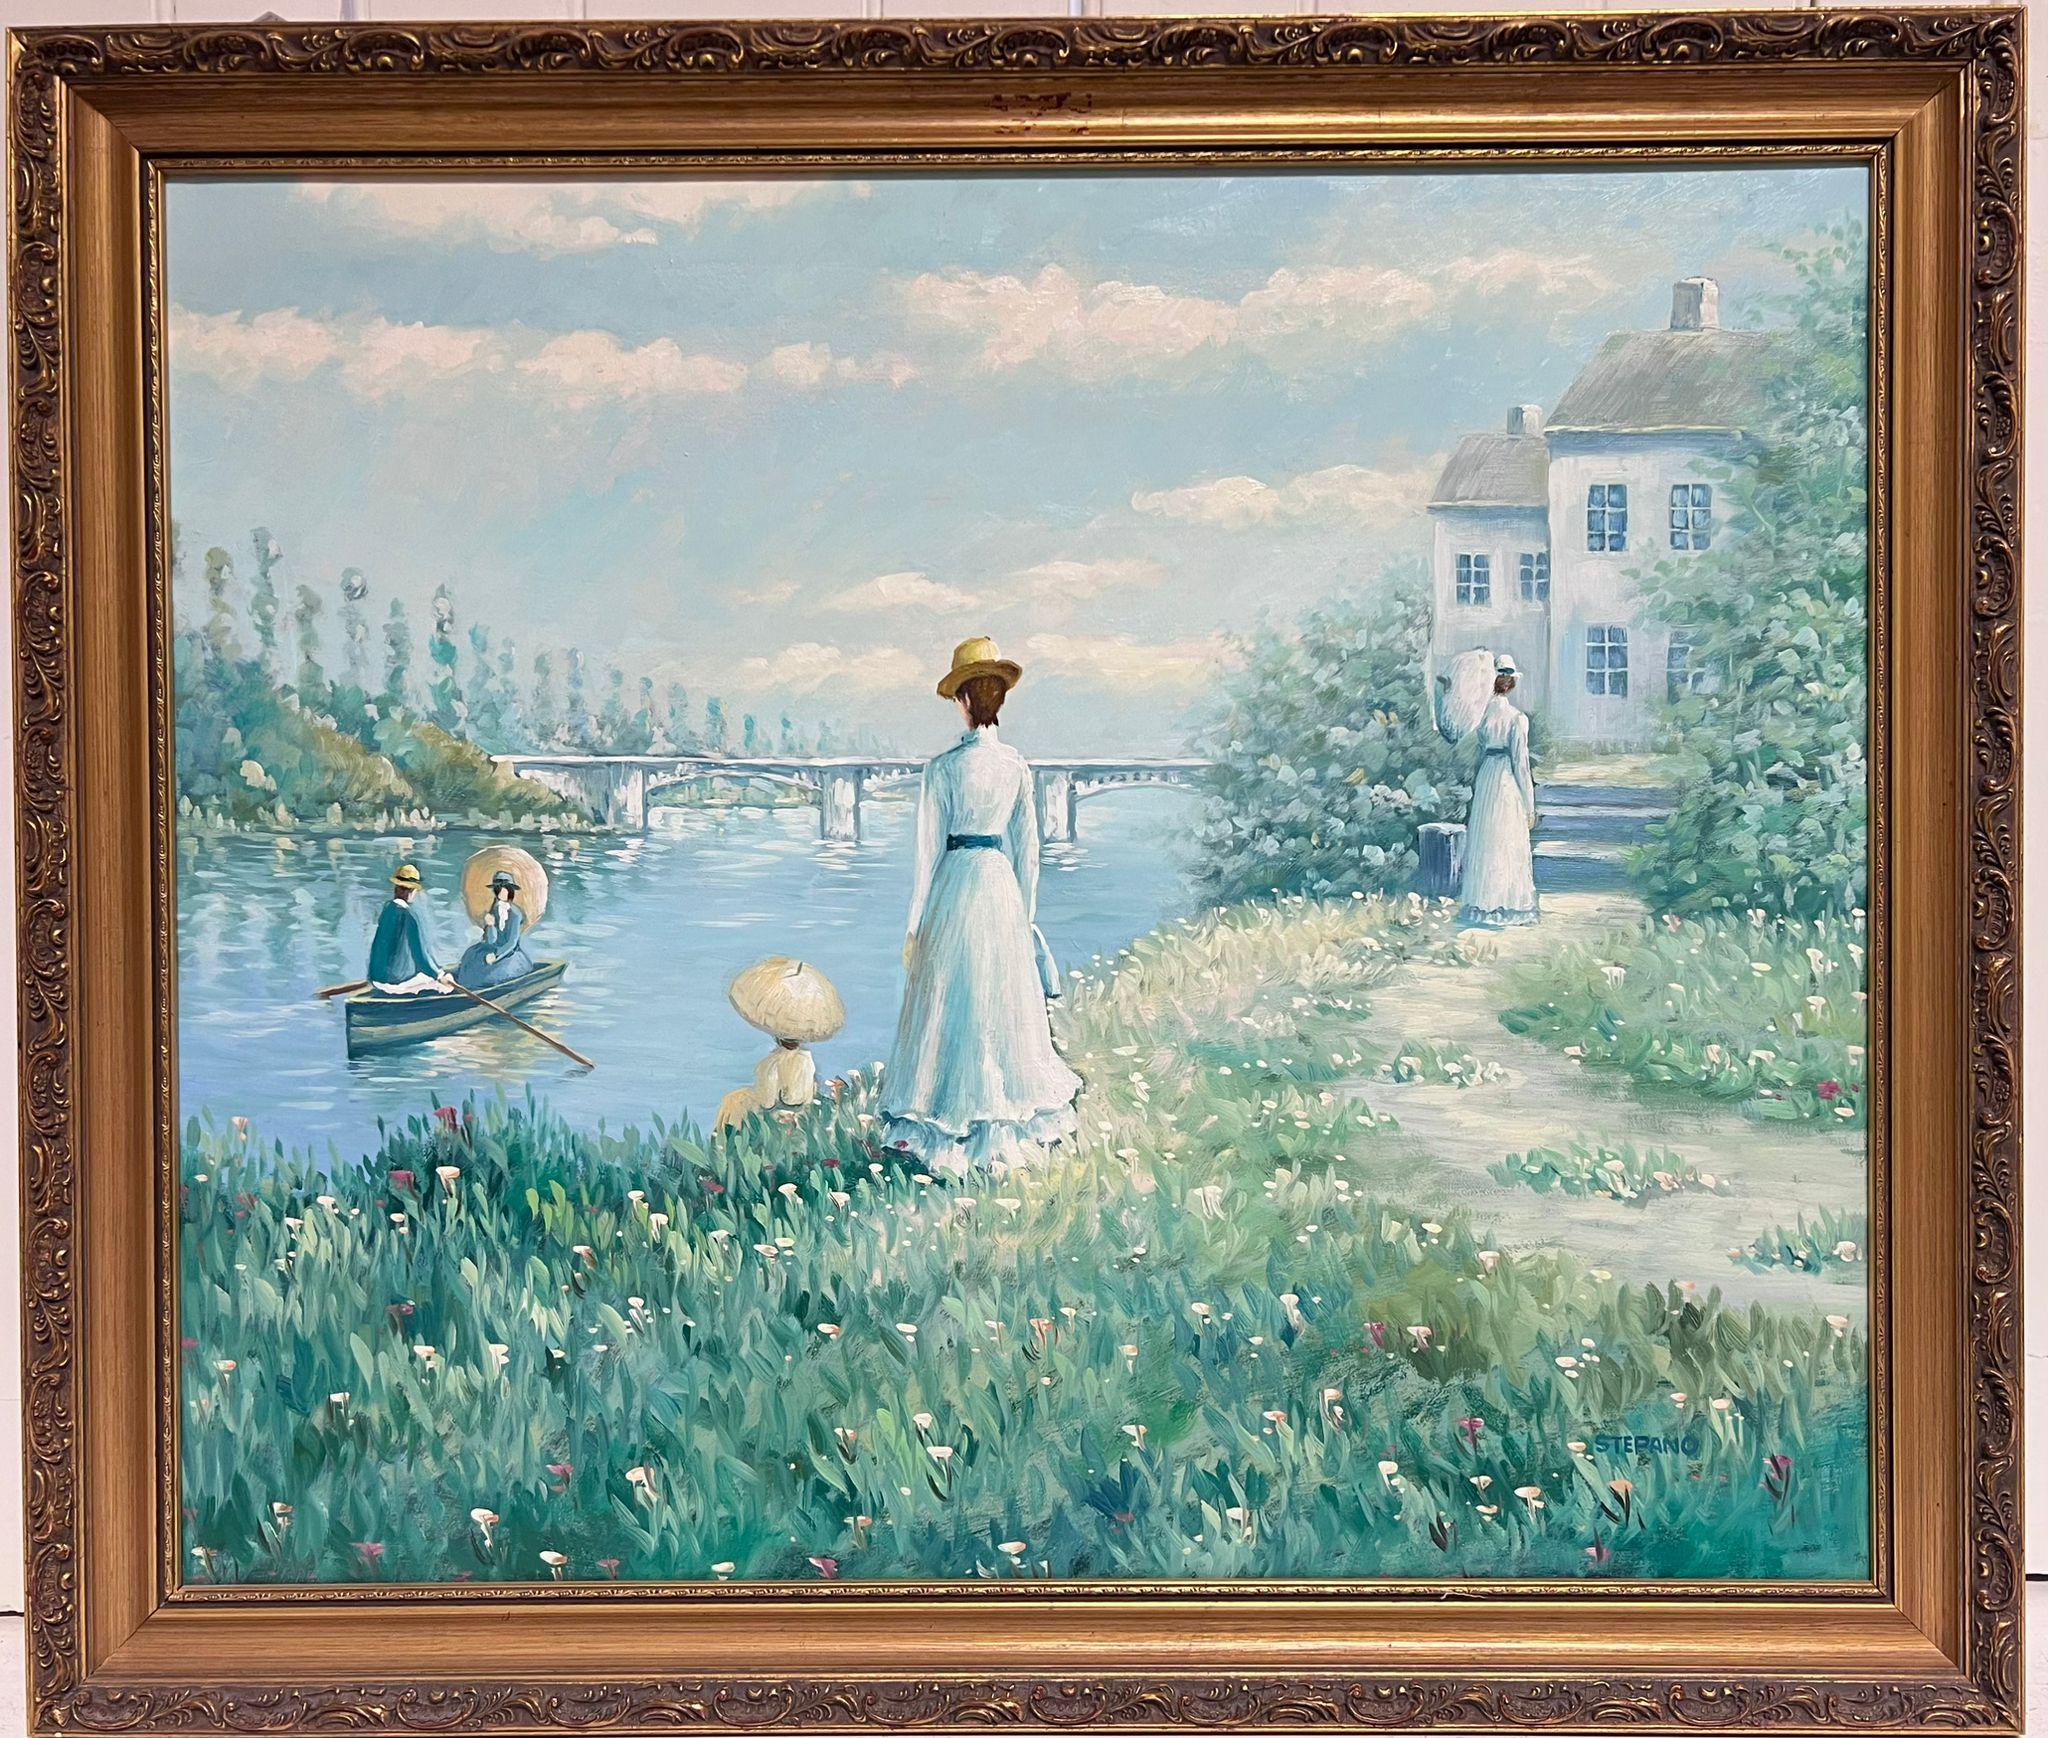 A Leisurely Day on the River
French/ Italian School, 20th century
signed oil on board, framed
framed: 24 x 28 inches
board: 20 x 25 inches
provenance: private collection, France
condition: very good and sound condition